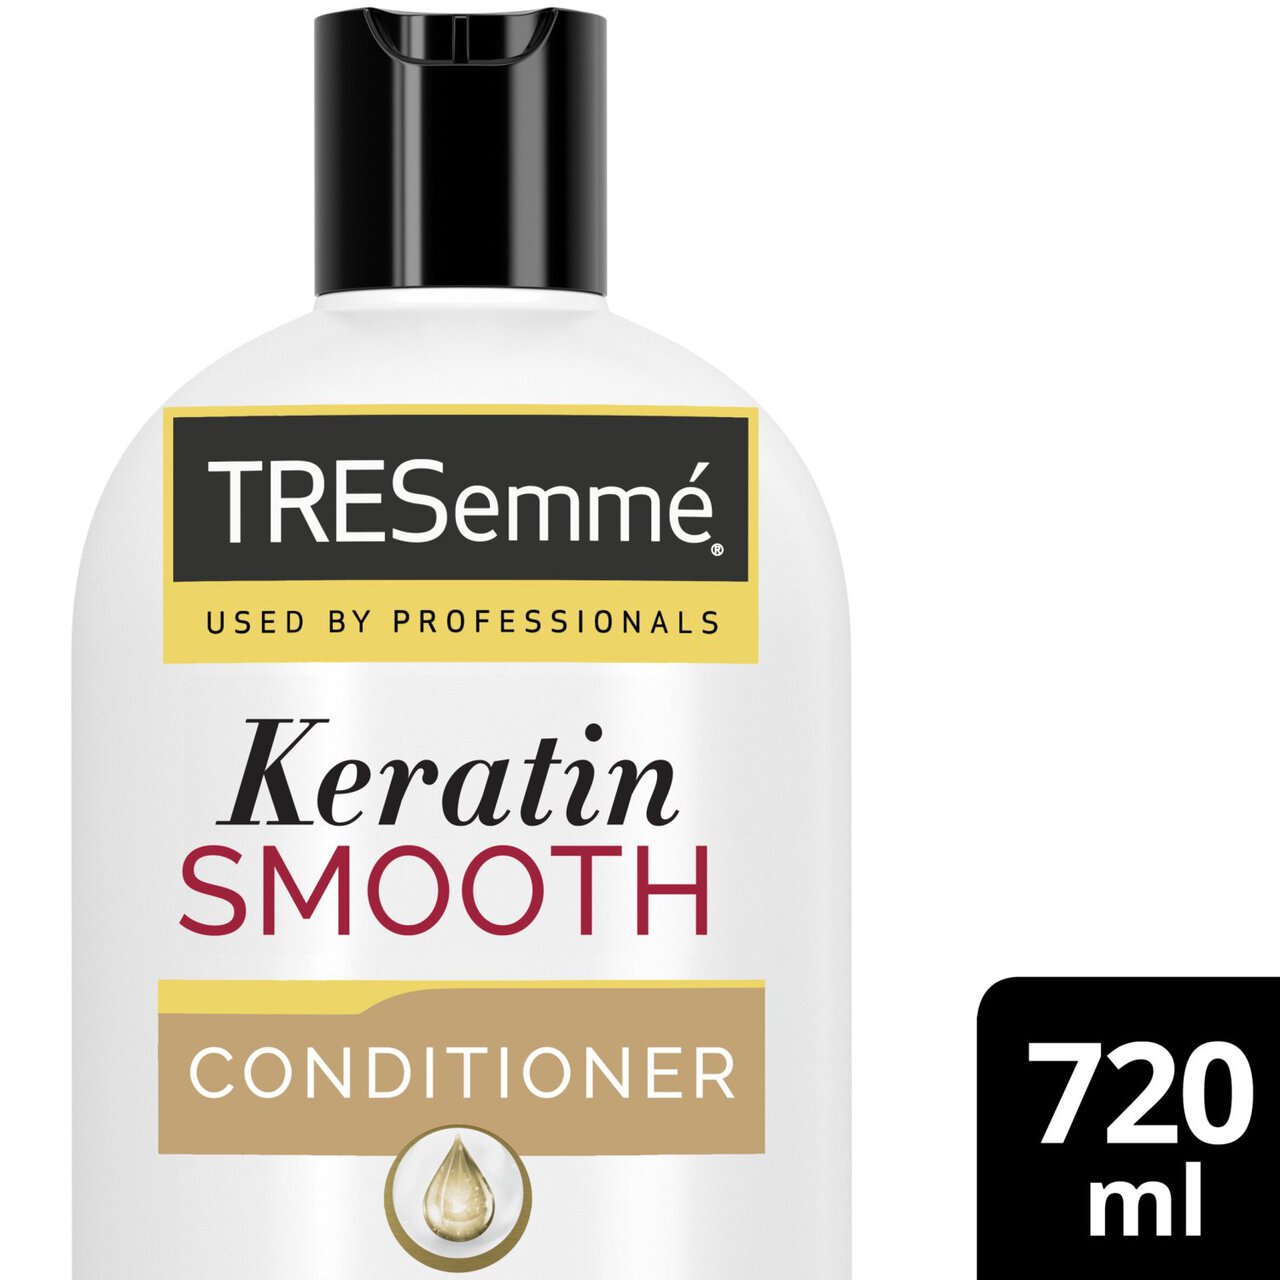 TRESemme KERATIN SMOOTH Conditioner 720ml